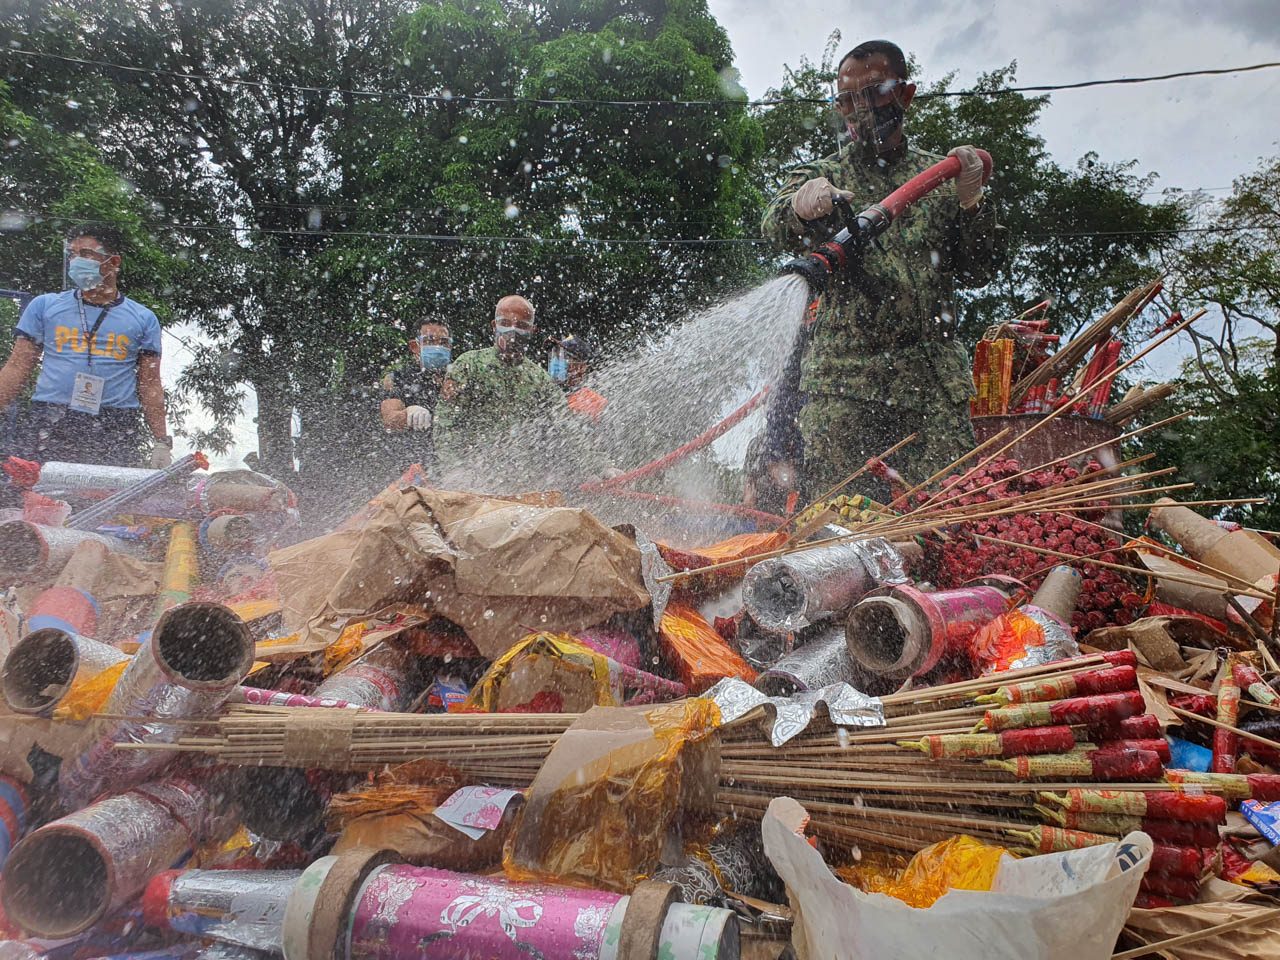 Here’s what you need to know about prohibited firecrackers